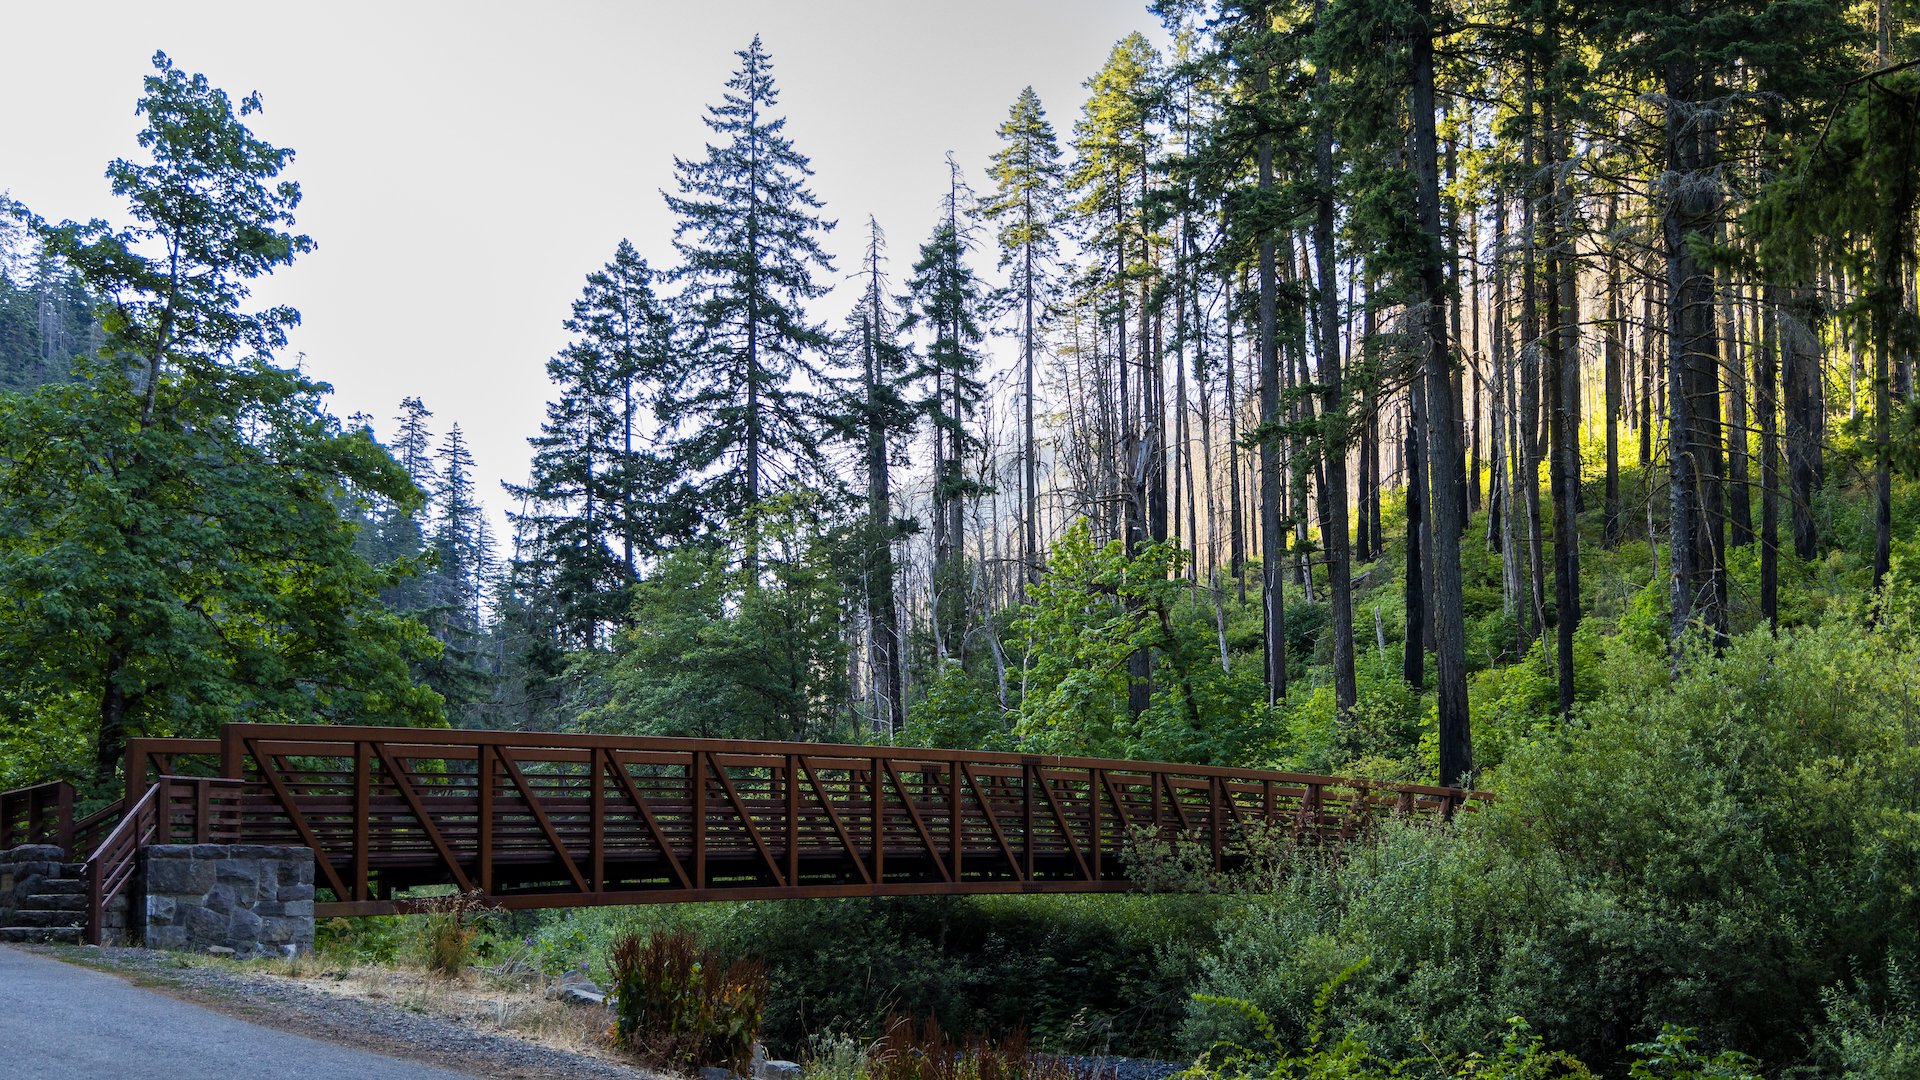  Since the fire, they’ve had to rebuild so much, This bridge at the trailhead is new since the last time we were here. 